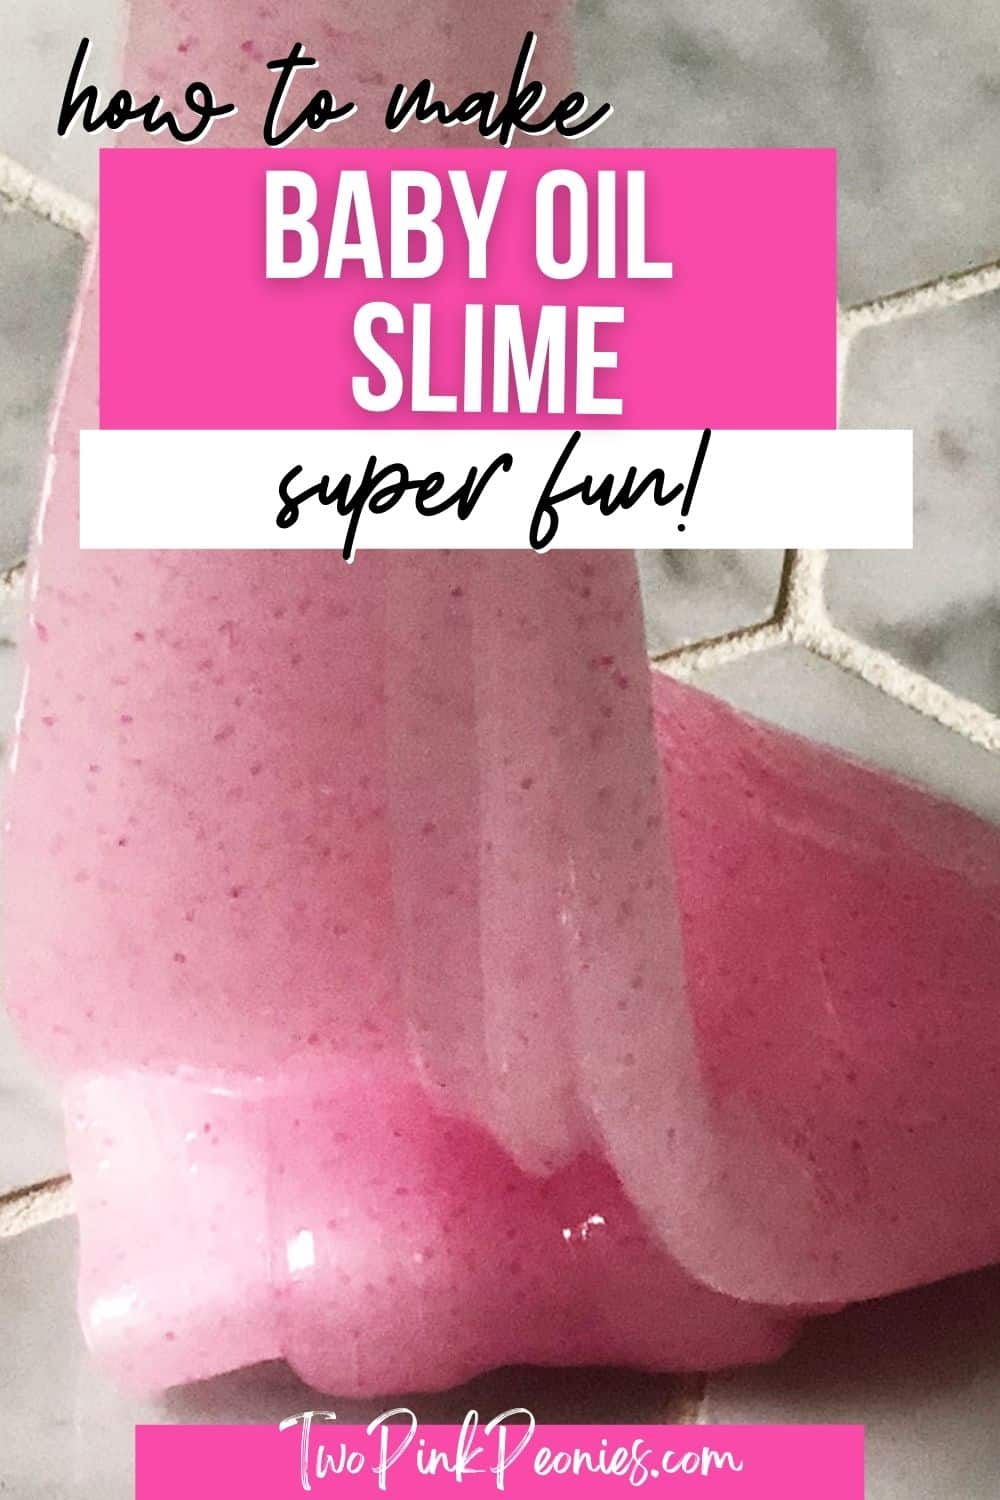 Image with text that says how to make baby oil slime super fun with an image of pink baby oil slime